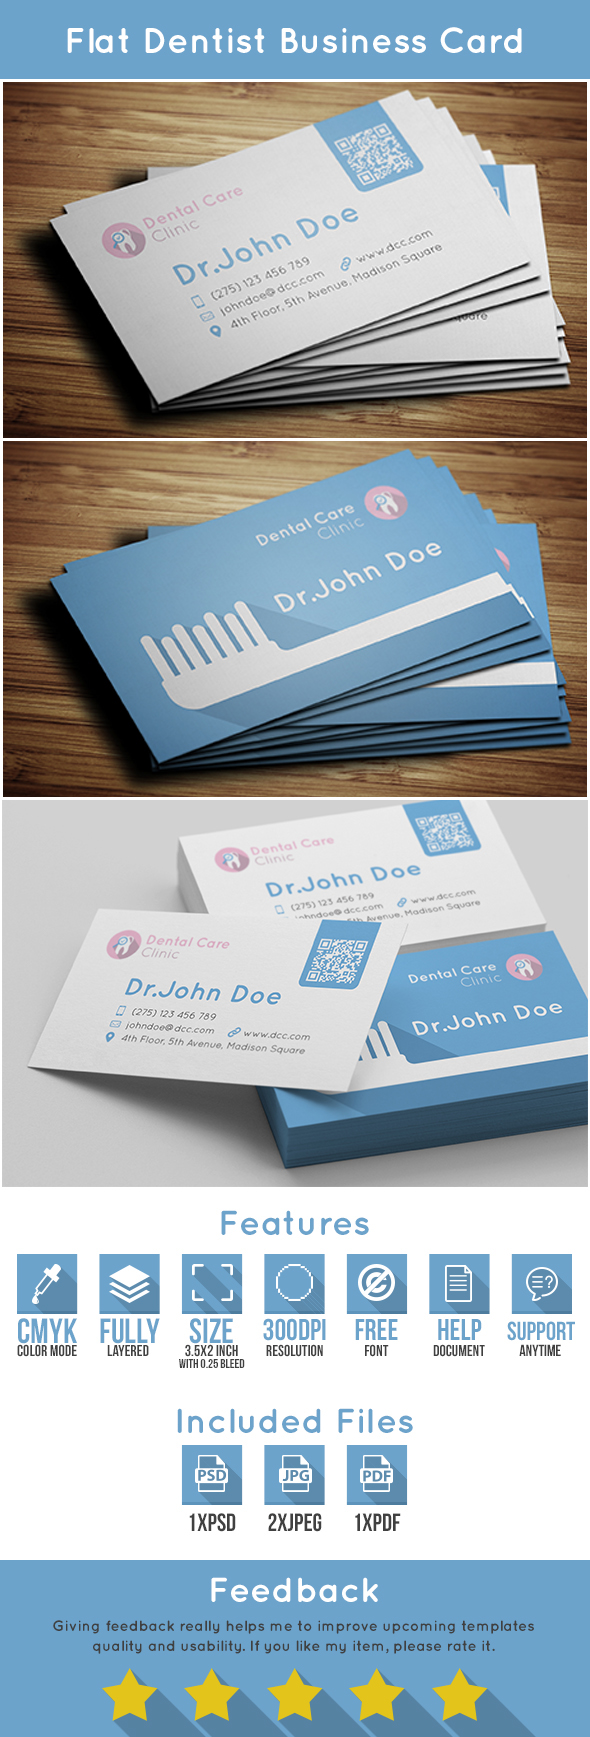 psd photoshop business card dentist clinic toothbrush flat dental care